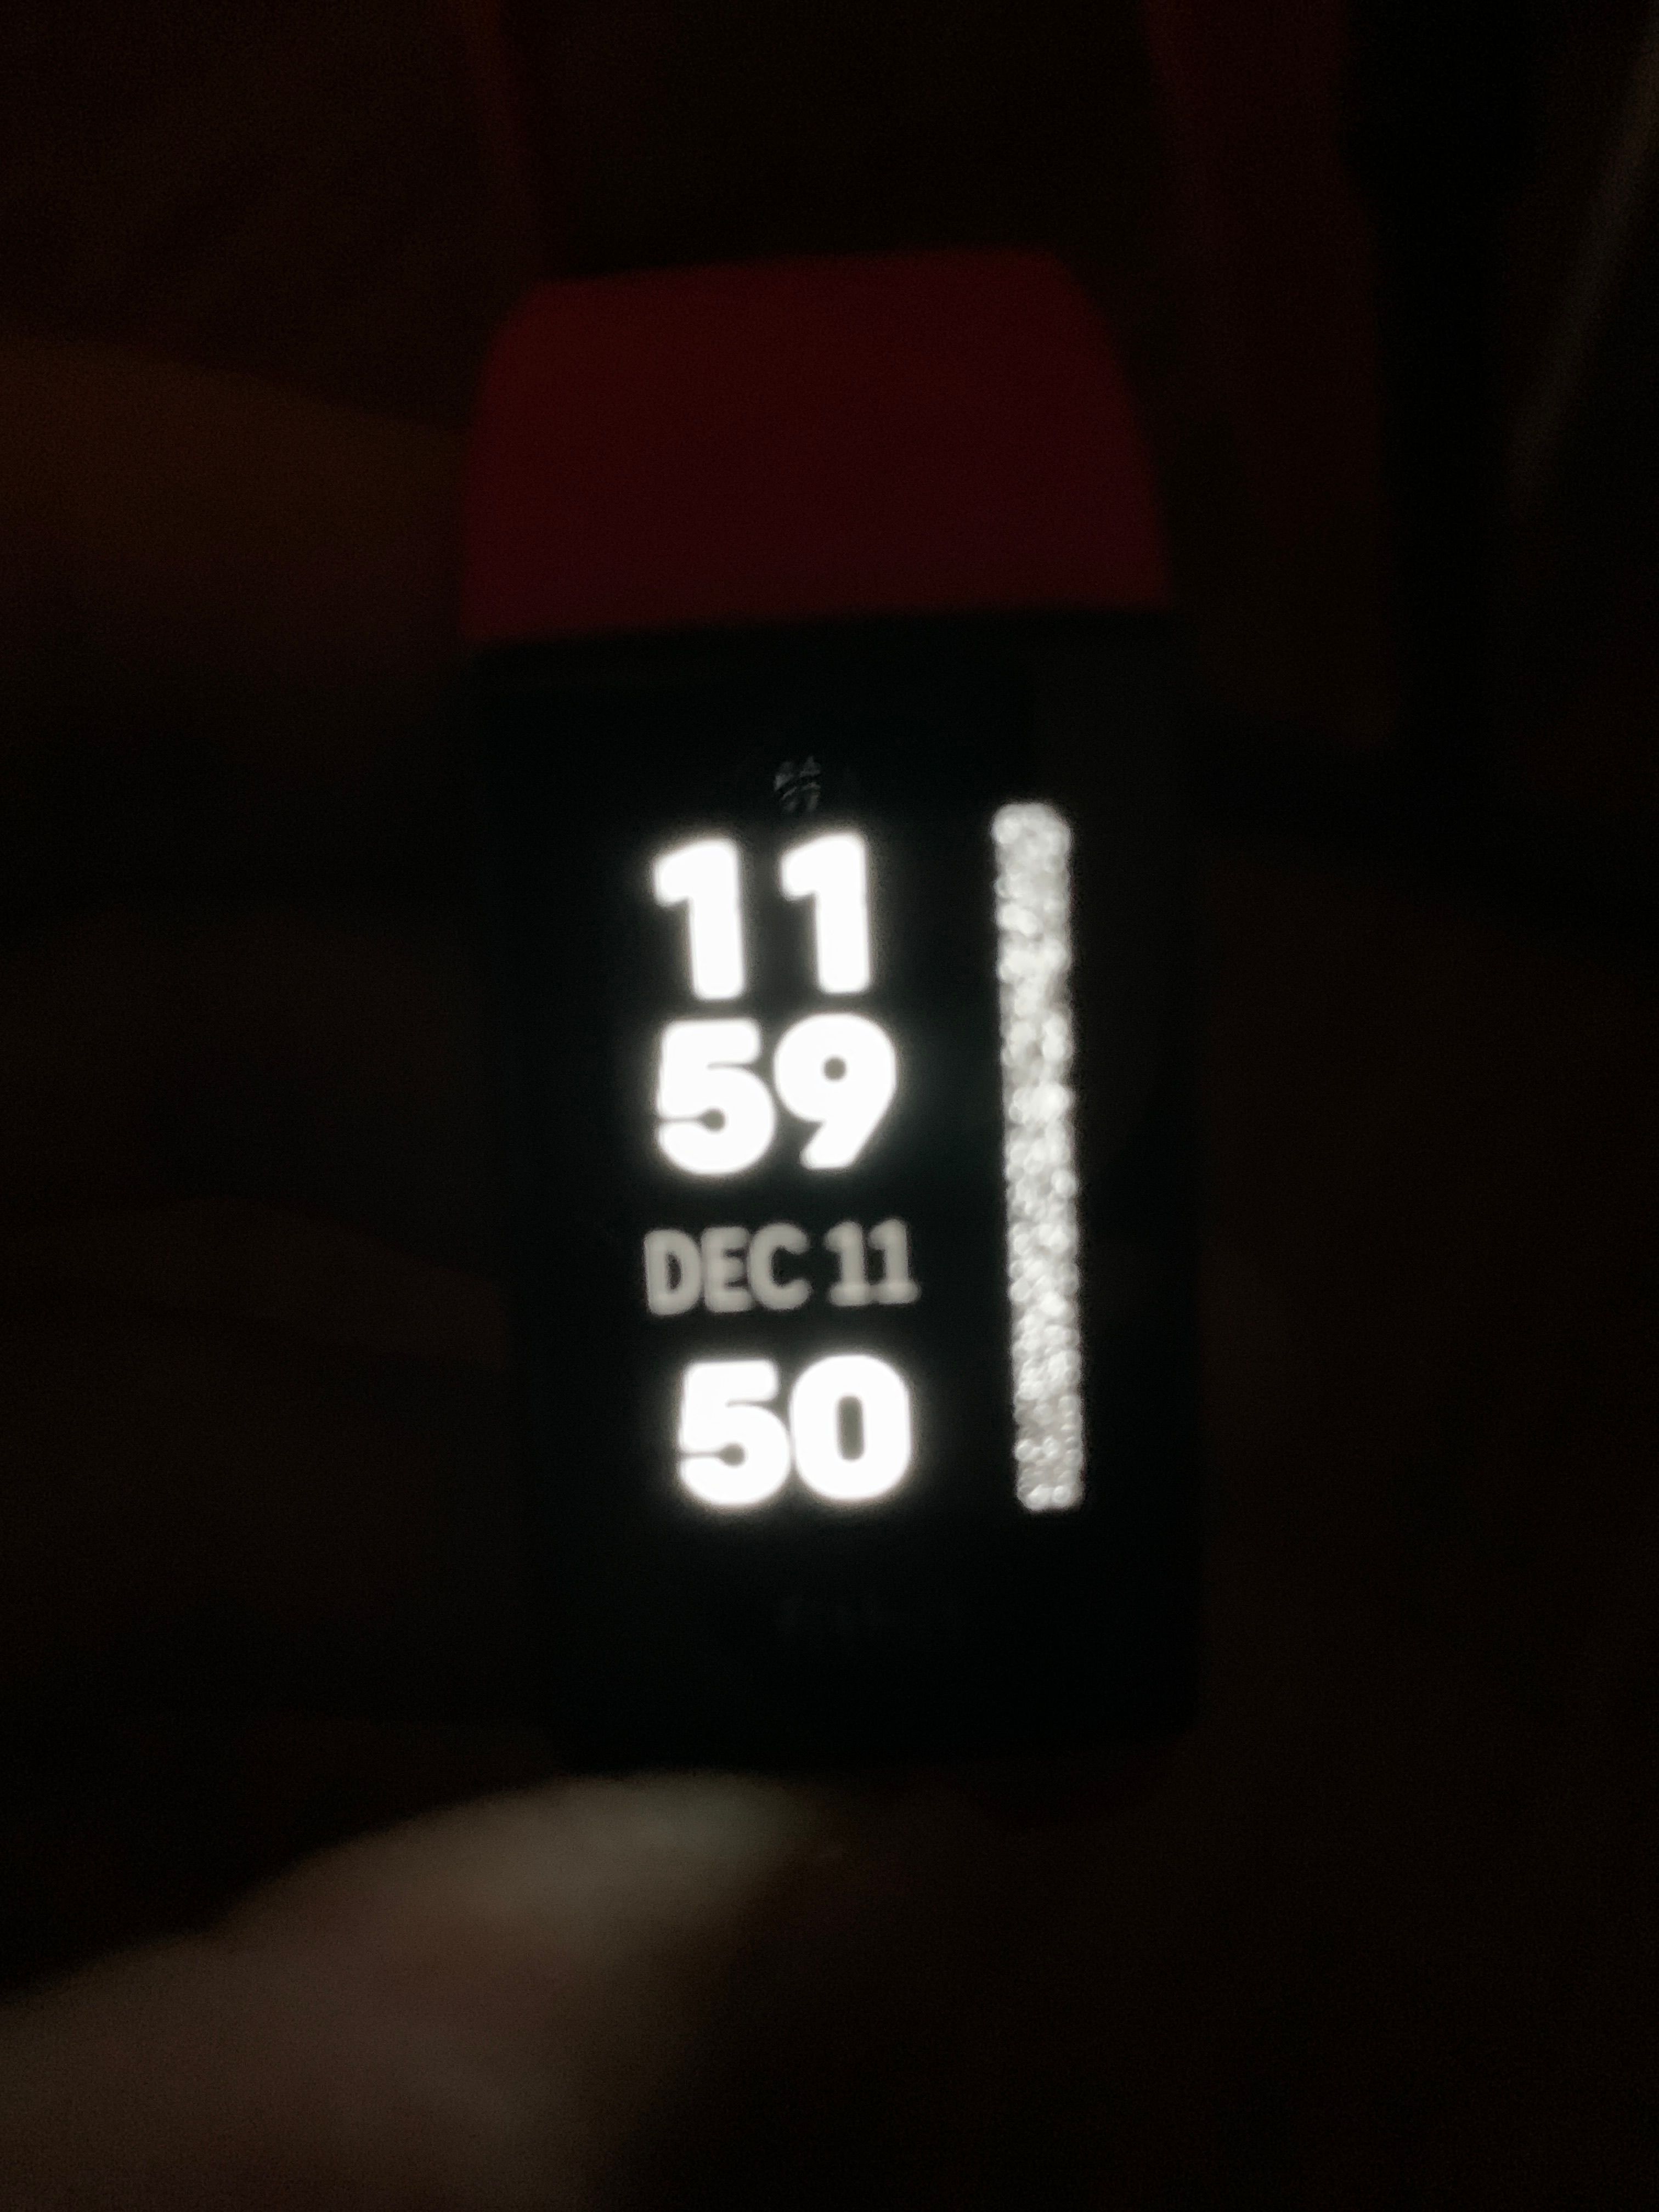 fitbit charge 3 face blank